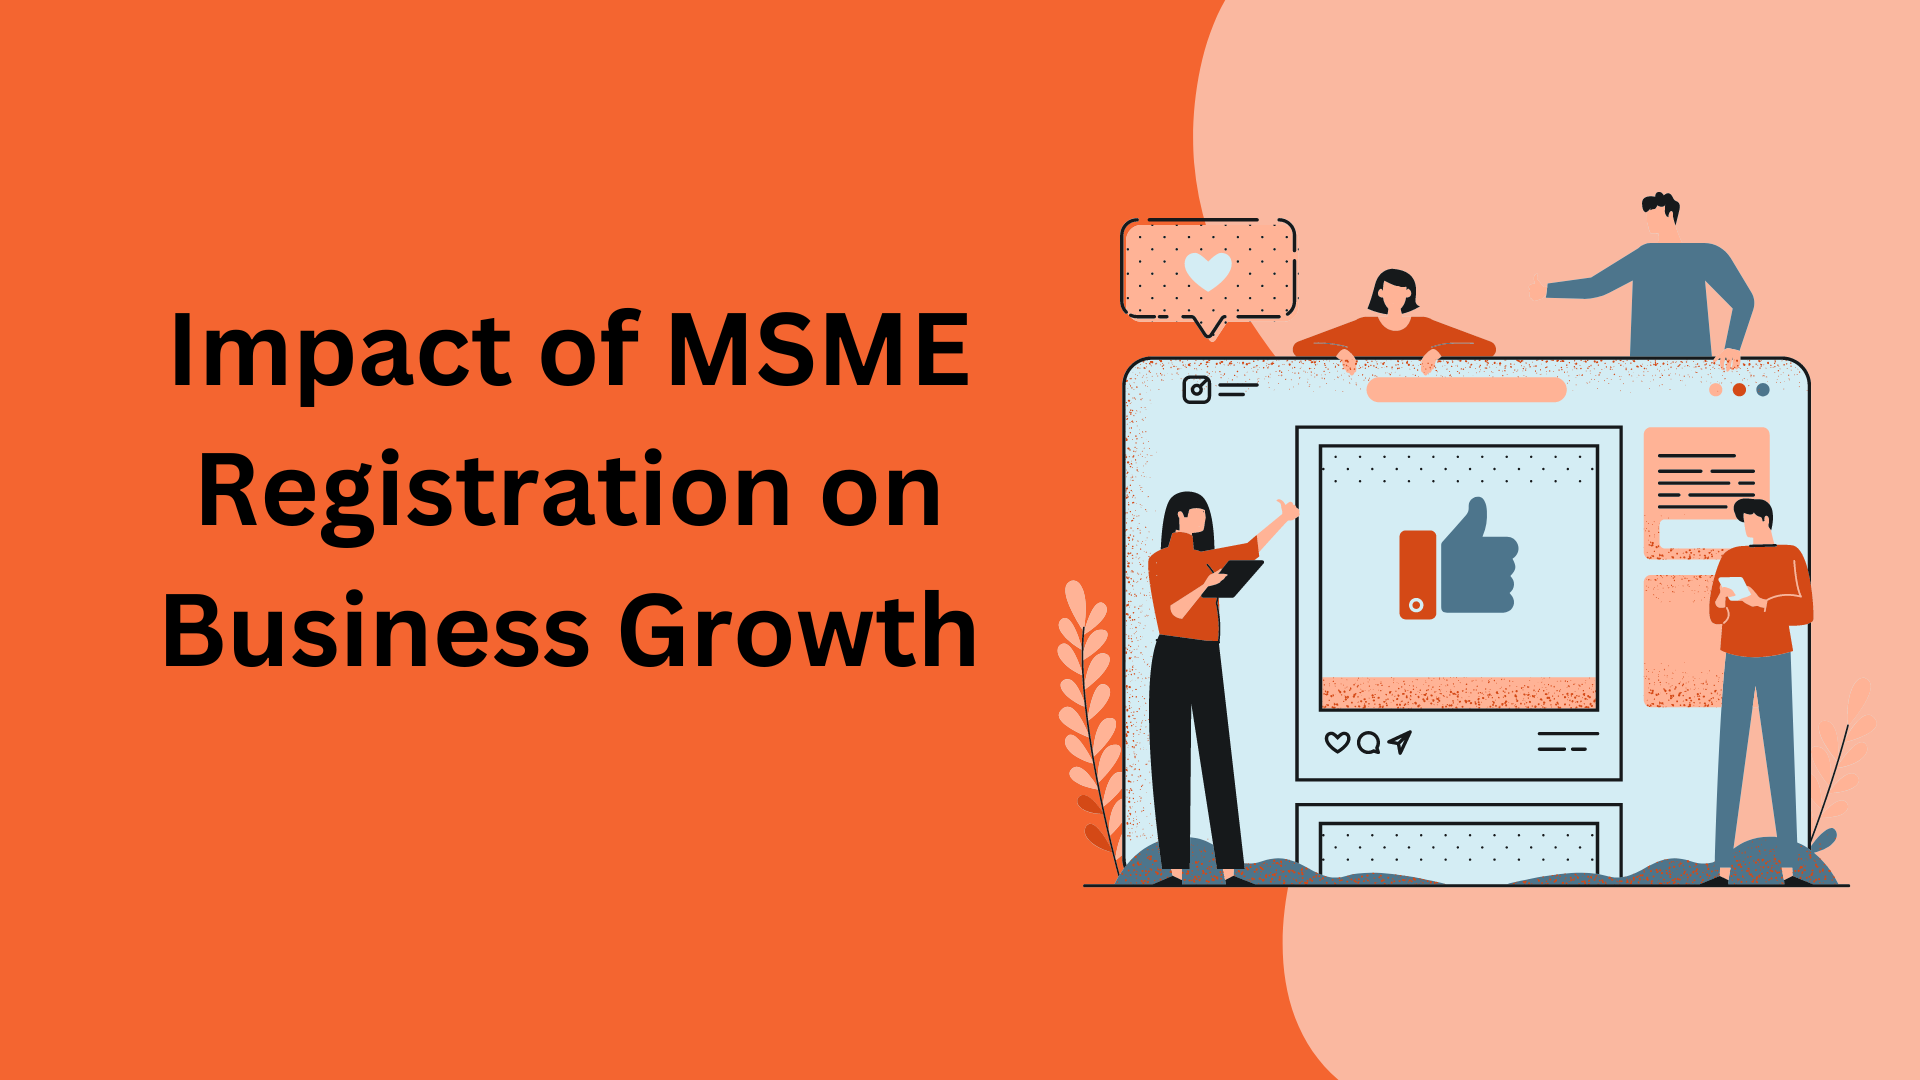 Impact of MSME Registration on Business Growth